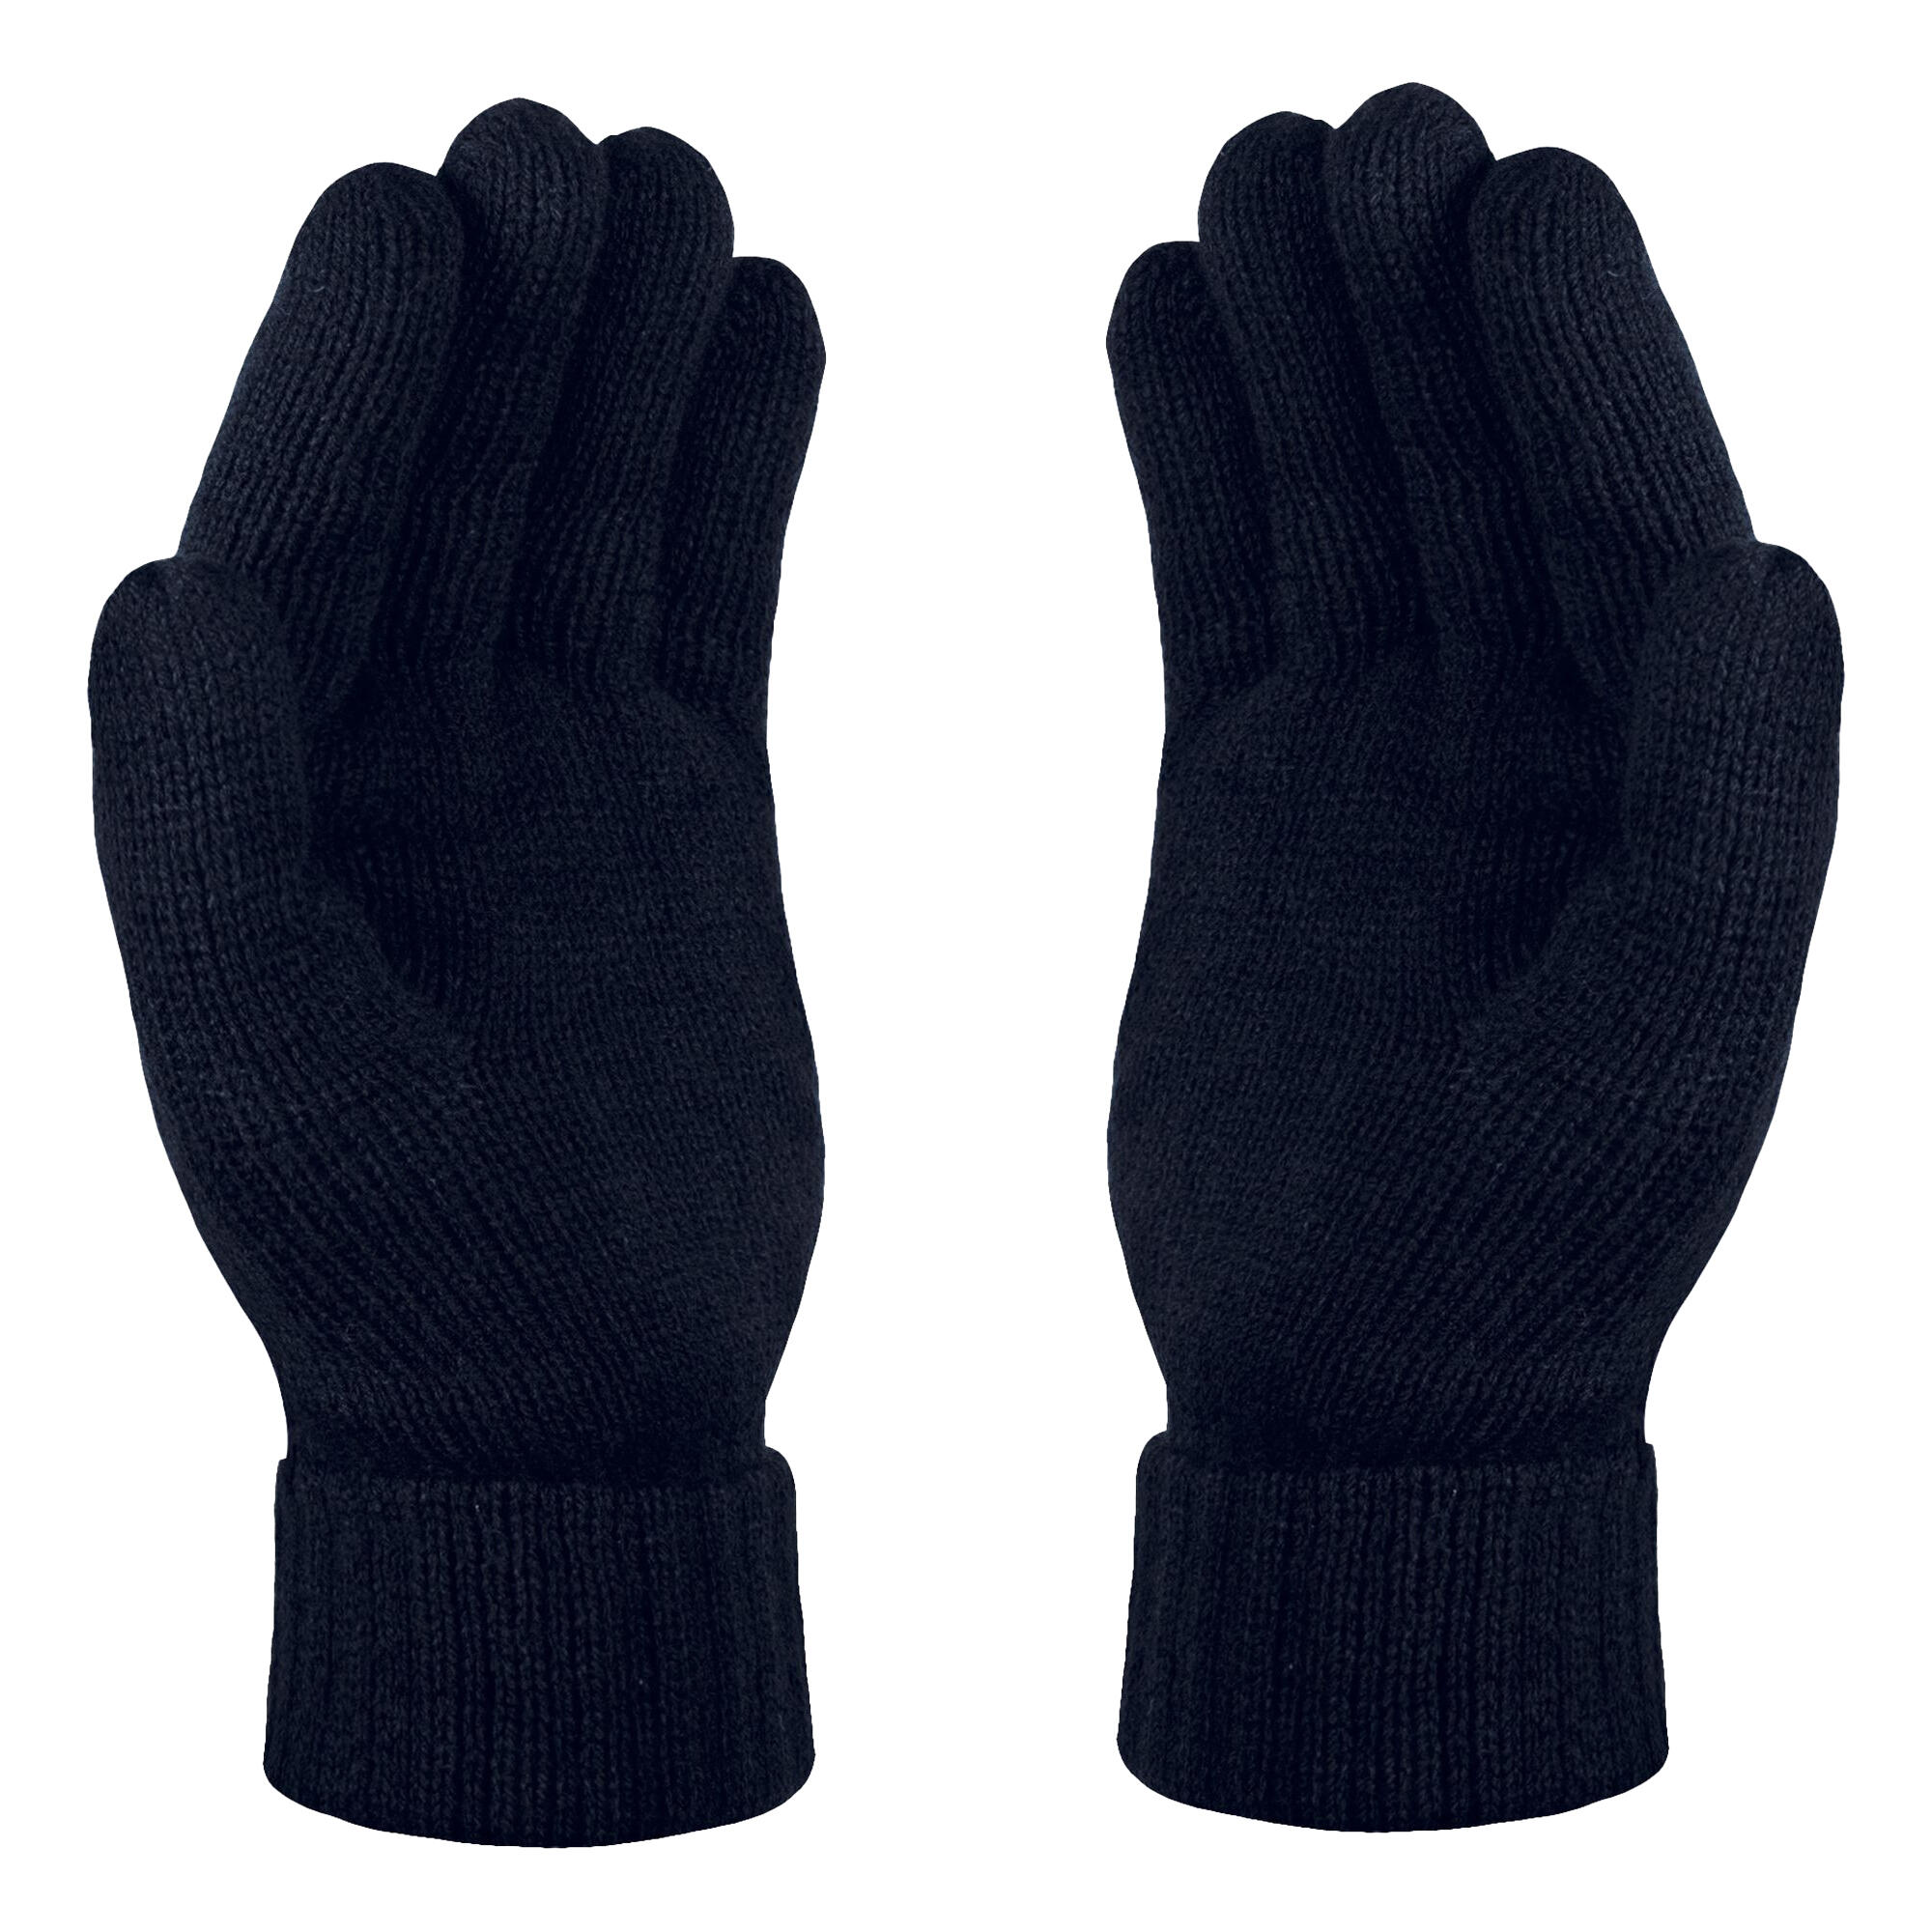 Unisex Thinsulate Thermal Winter Gloves (Navy) 3/4